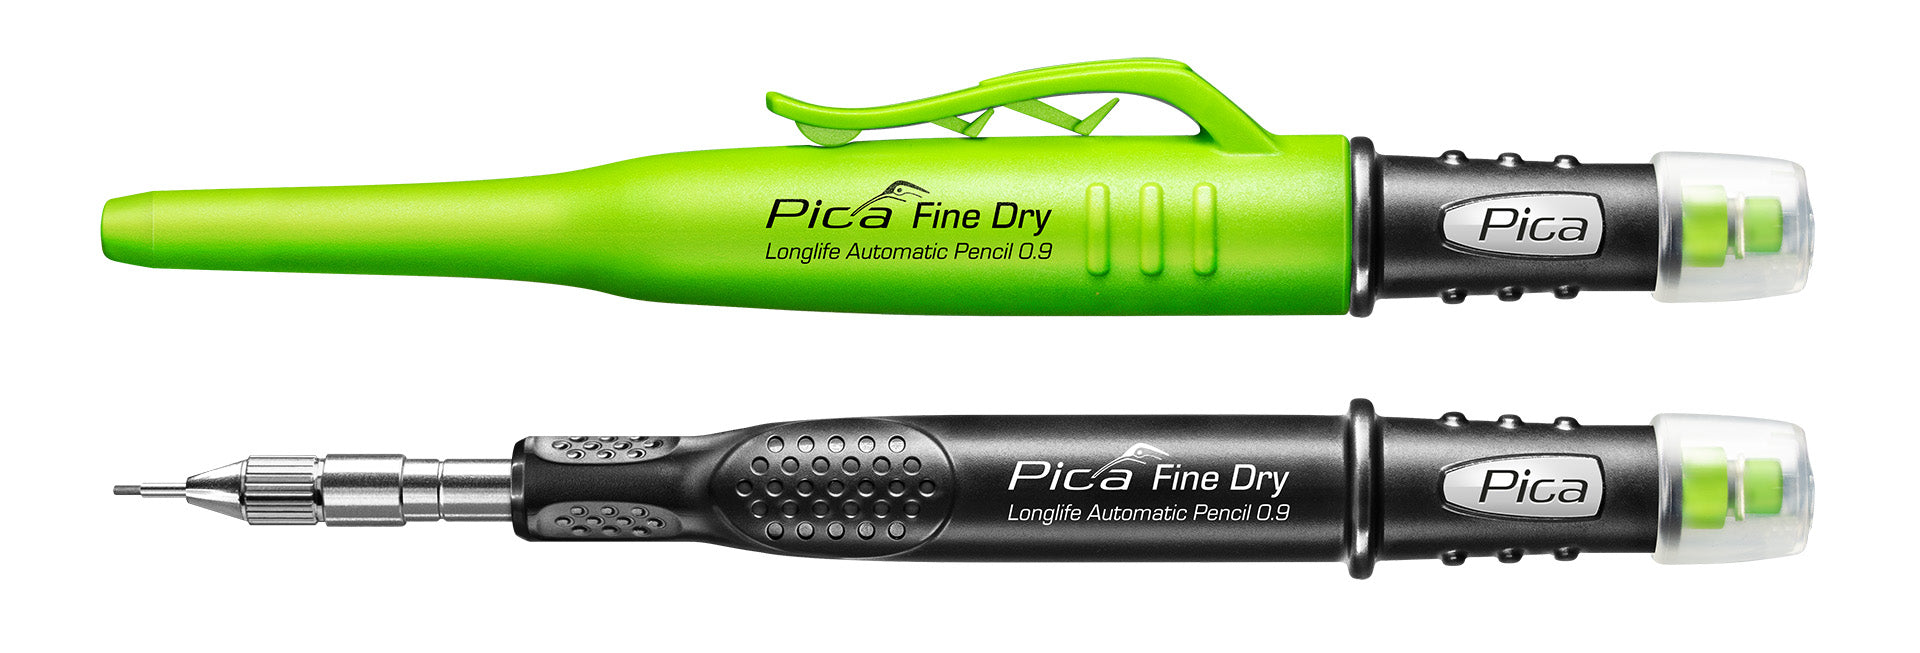 Pica Fine Dry Longlife Automatic Pencil 0.9 PICA7070 Power Tool Services